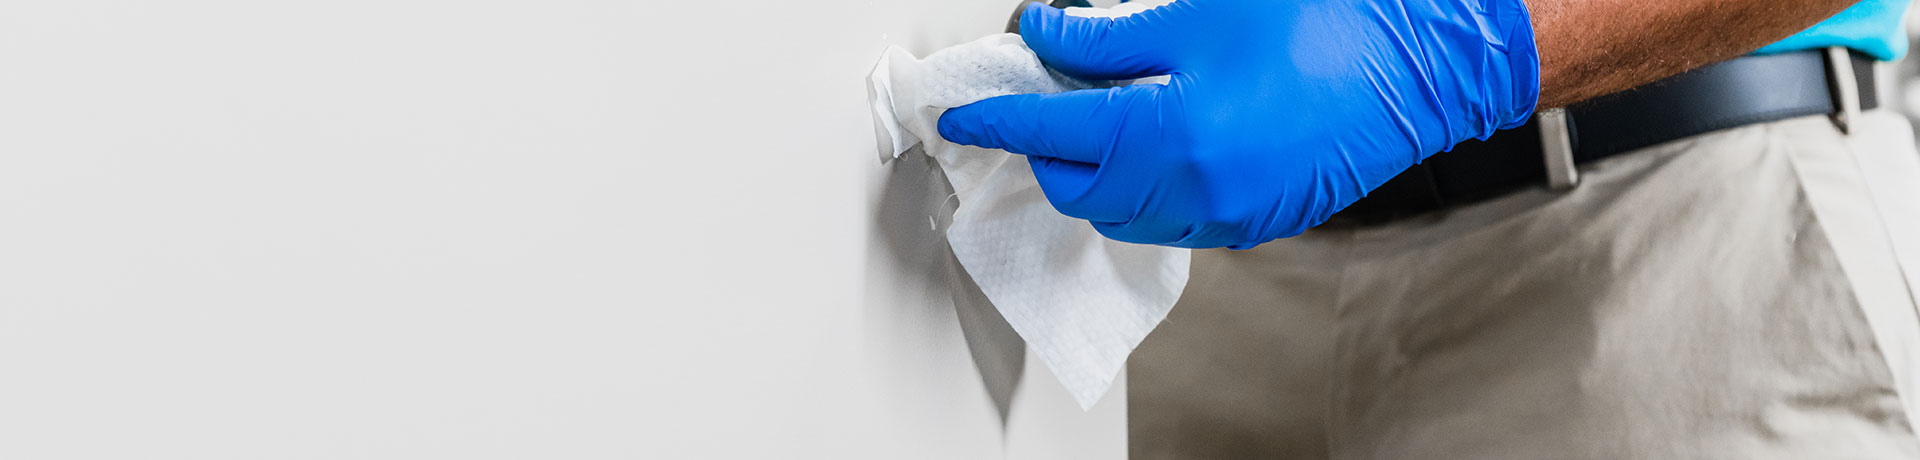 Cleaning person wearing protective latex gloves using a disinfection wipe on a door handle